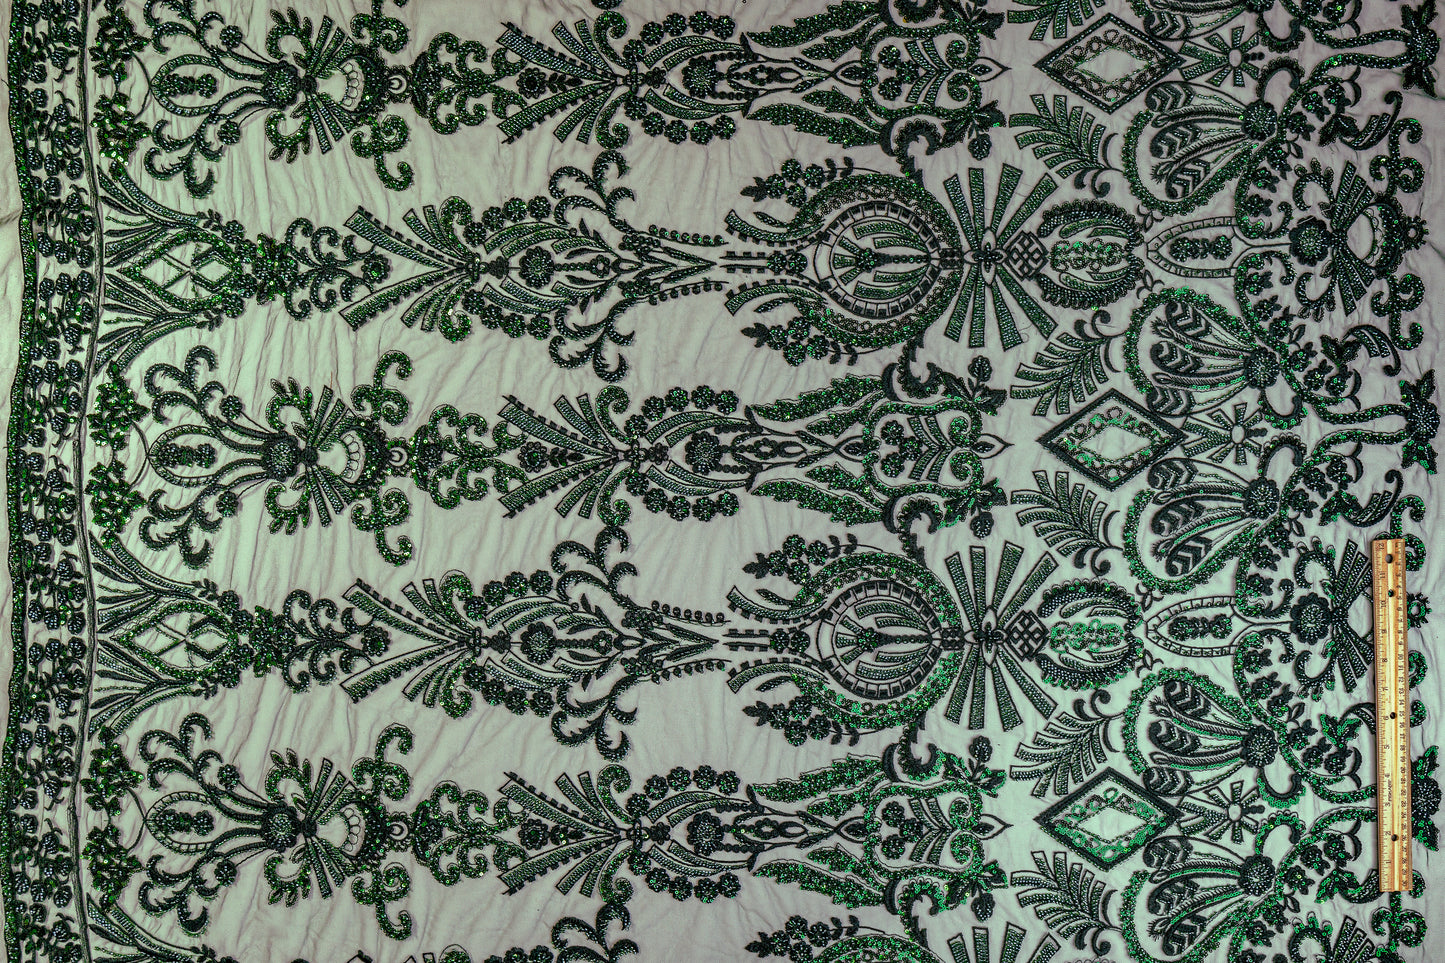 Damask Beaded and Embroidered Tulle - Emerald Green